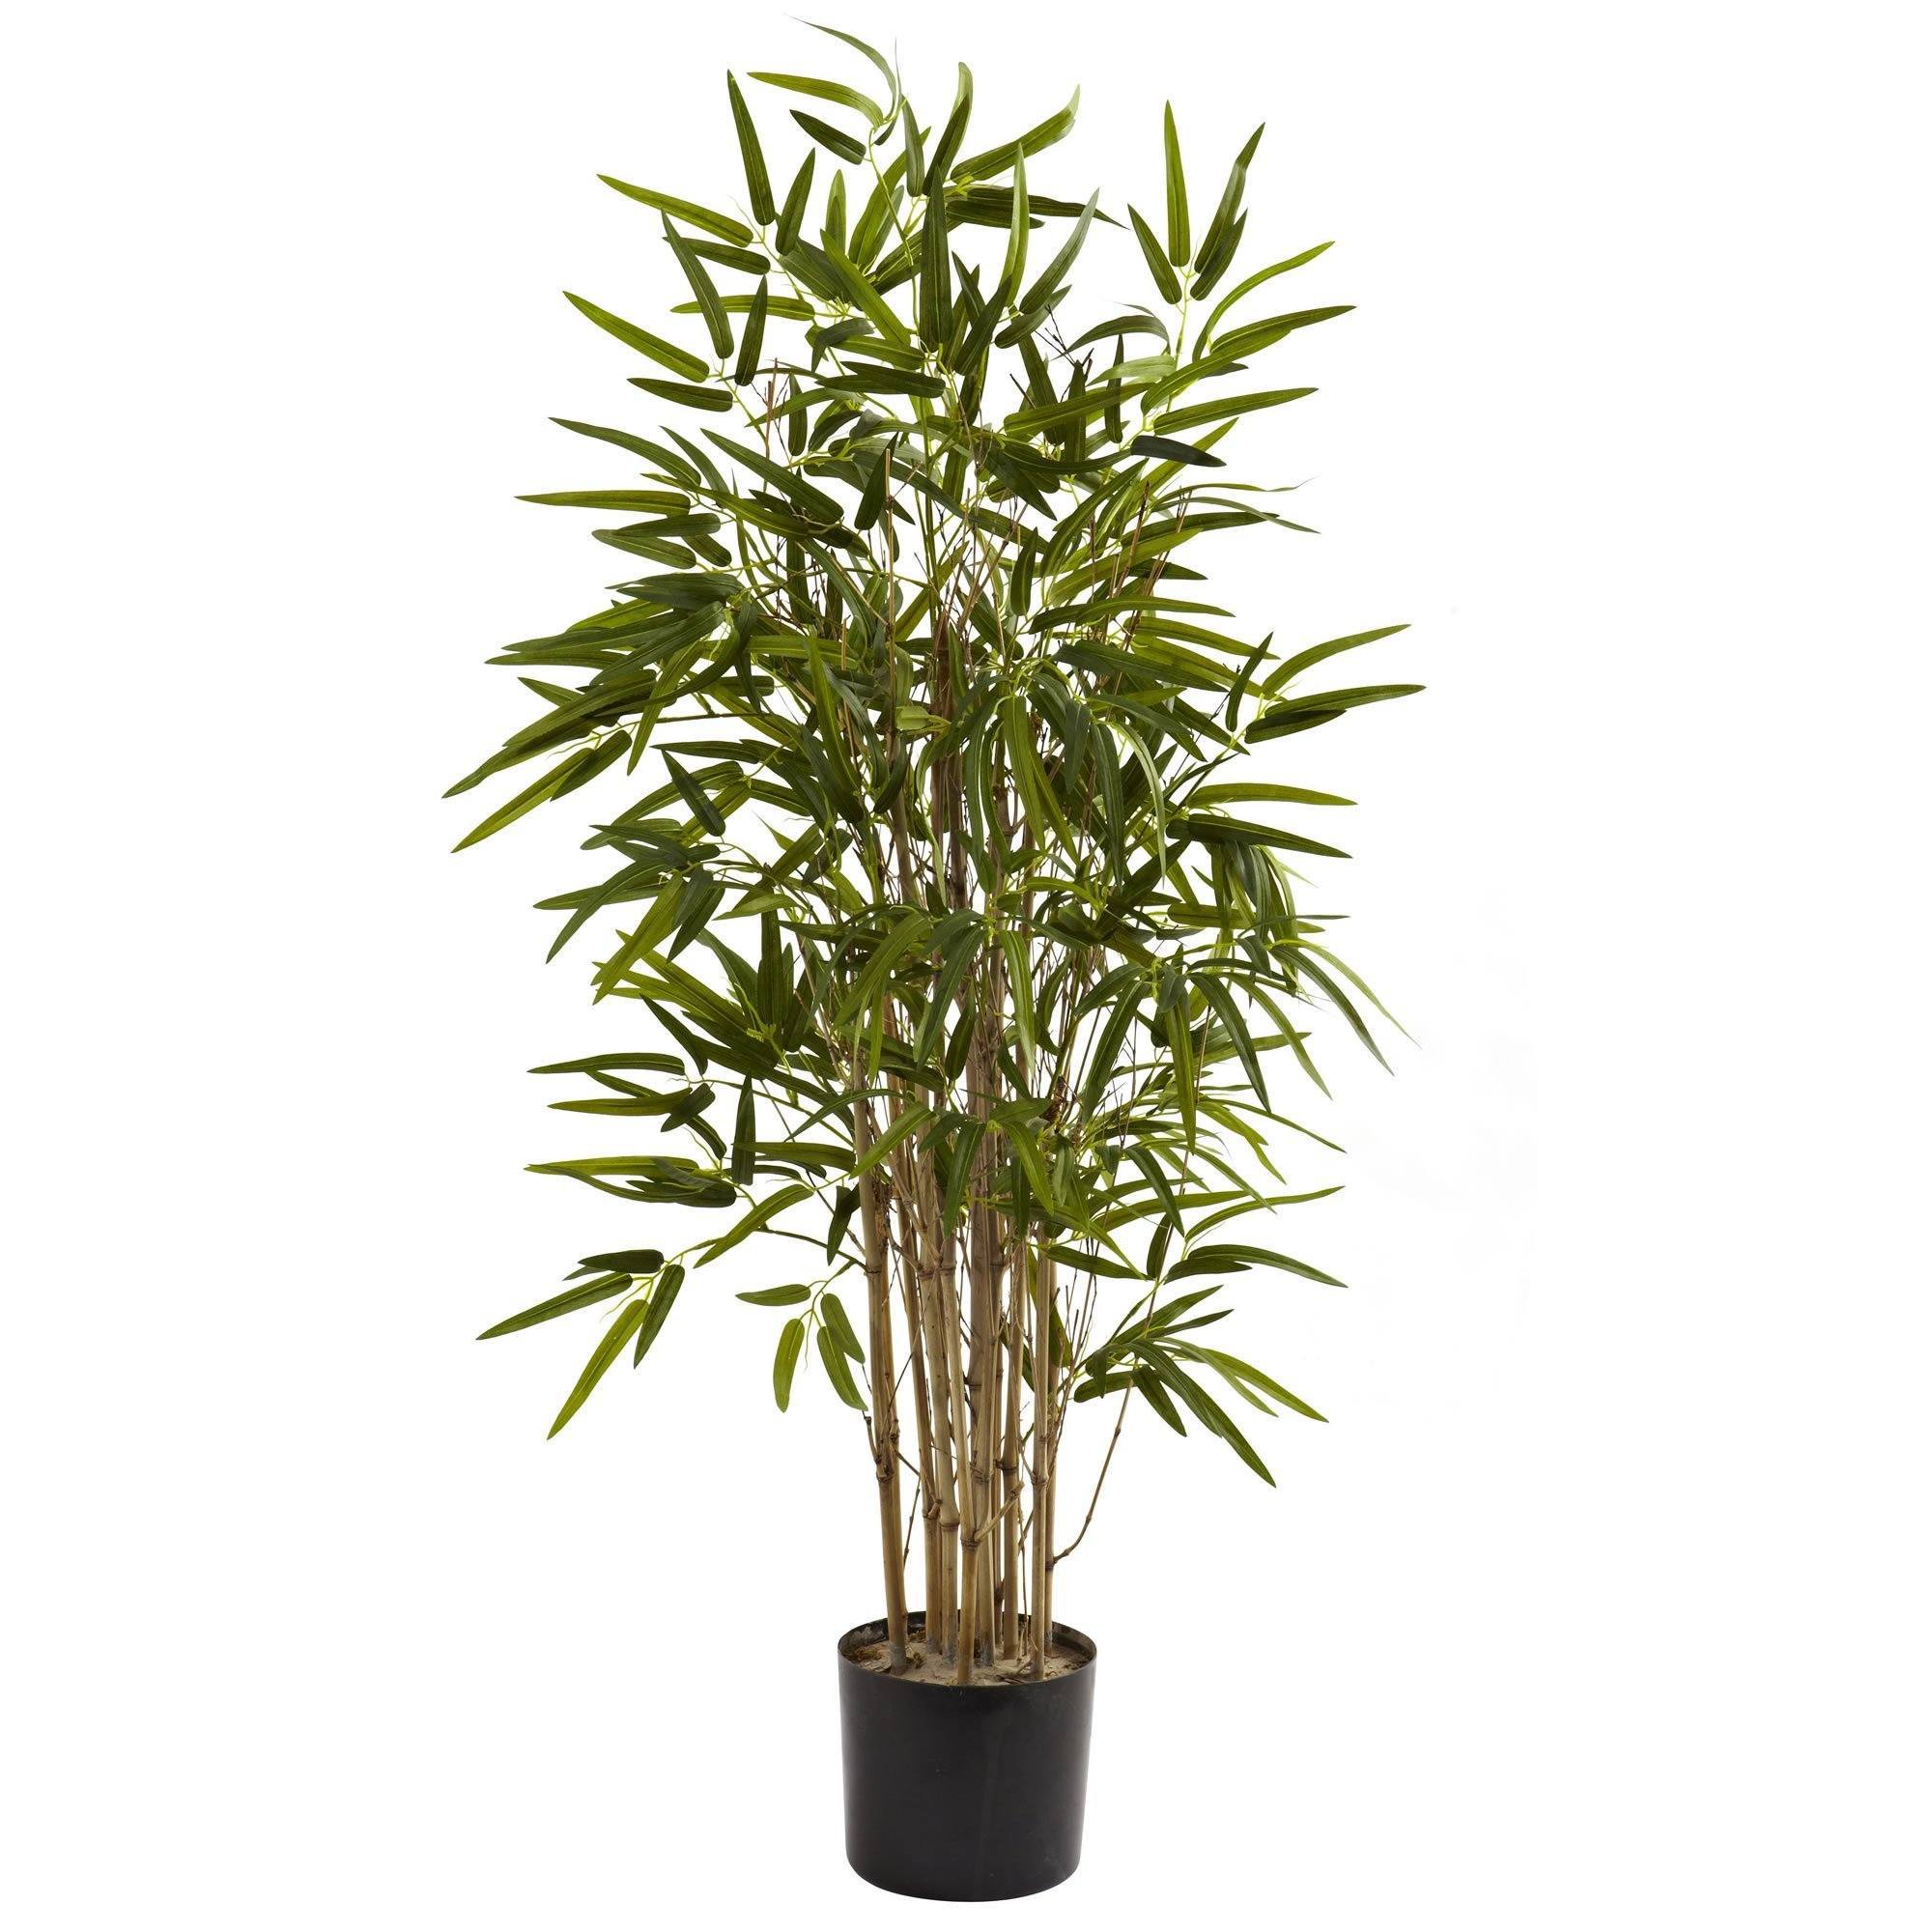 Artificial Tree - 3.5' Twiggy Bamboo Tree by Nearly Natural